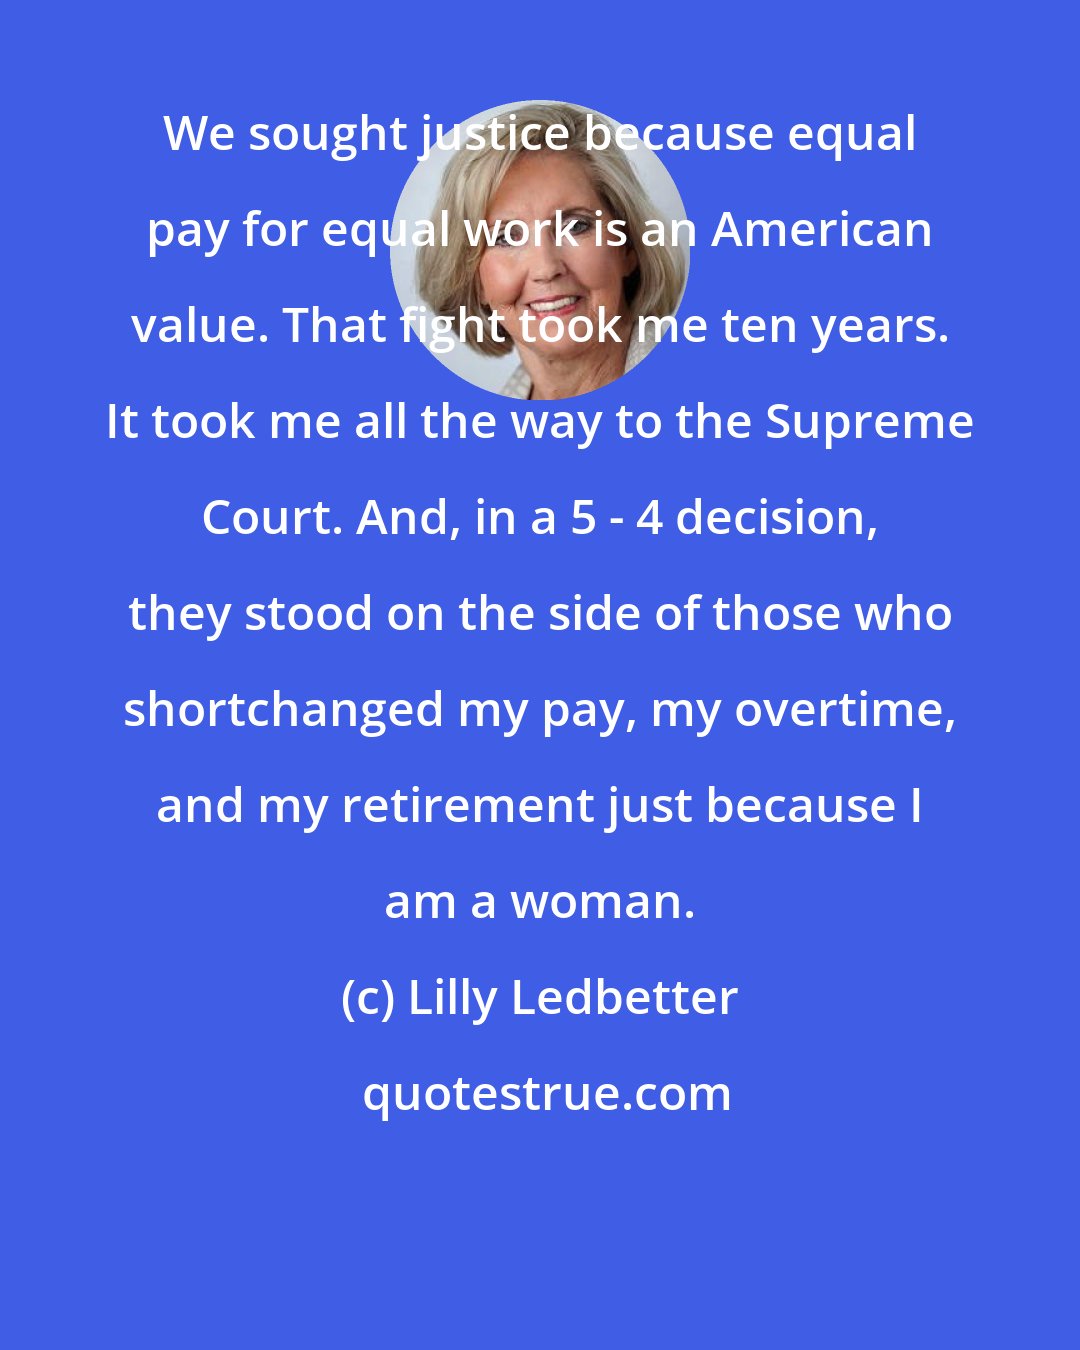 Lilly Ledbetter: We sought justice because equal pay for equal work is an American value. That fight took me ten years. It took me all the way to the Supreme Court. And, in a 5 - 4 decision, they stood on the side of those who shortchanged my pay, my overtime, and my retirement just because I am a woman.